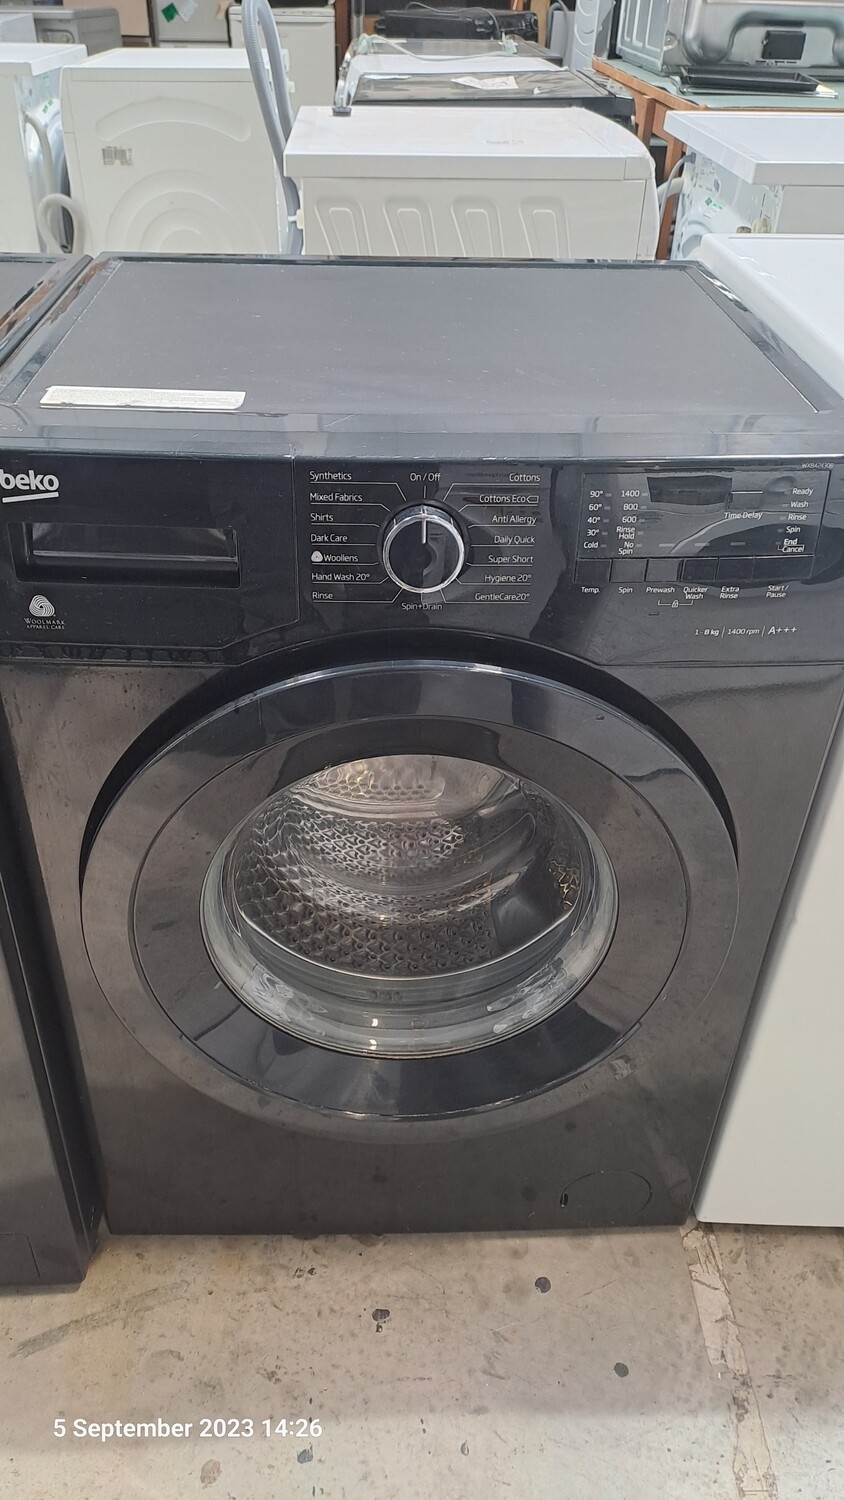 Beko WX842430B 8KG 1400rpm Washing Machine Black, Located in our Whitby Road shop